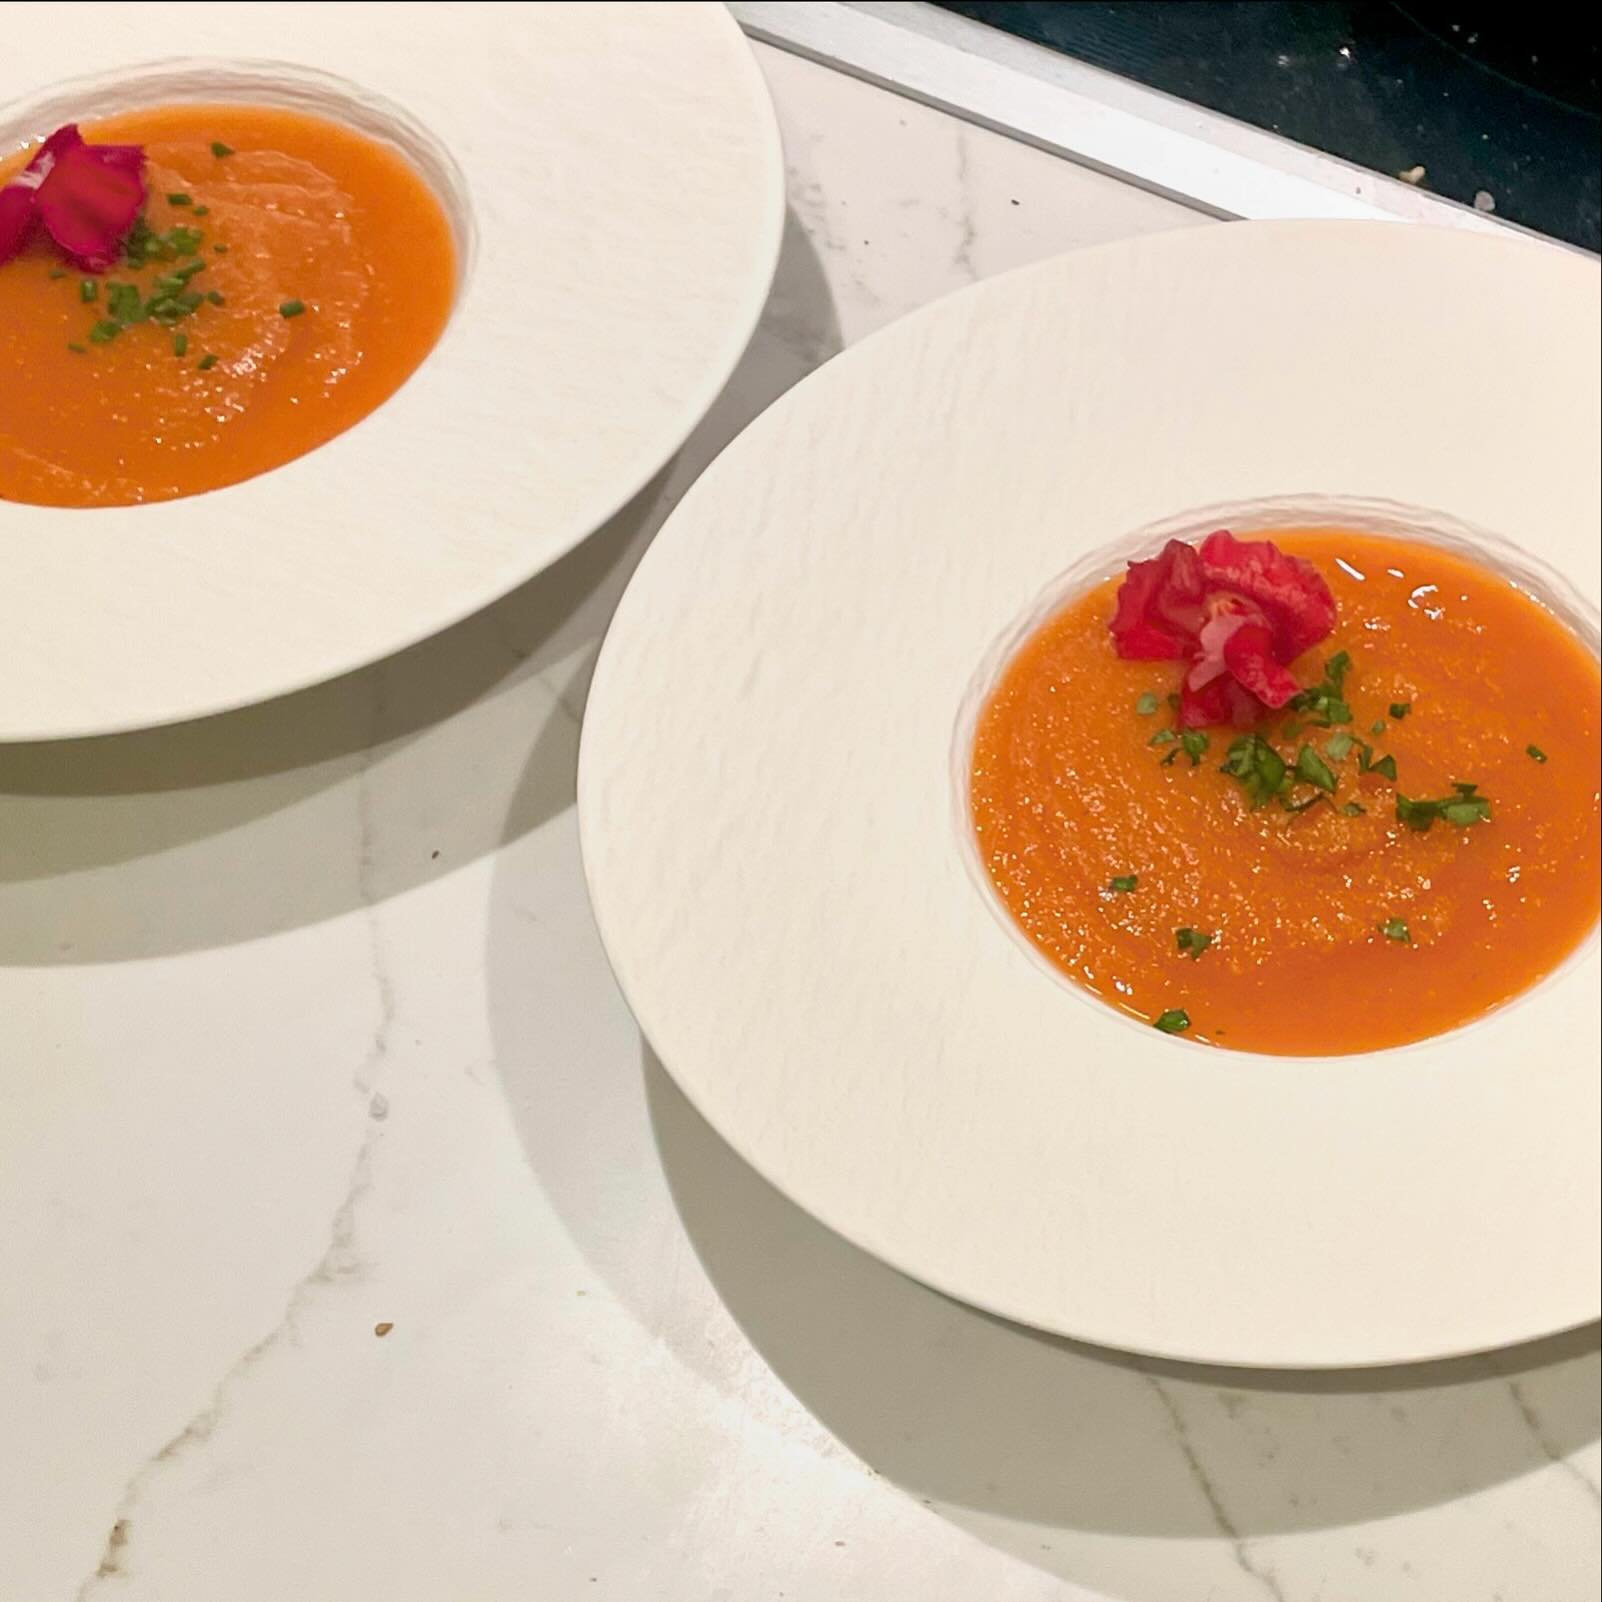 Or&hellip;carrot-ginger soup for the vegetarians. #bluaubergine #fabulousfood #catering #privatechef #passover #sedermeal #soup